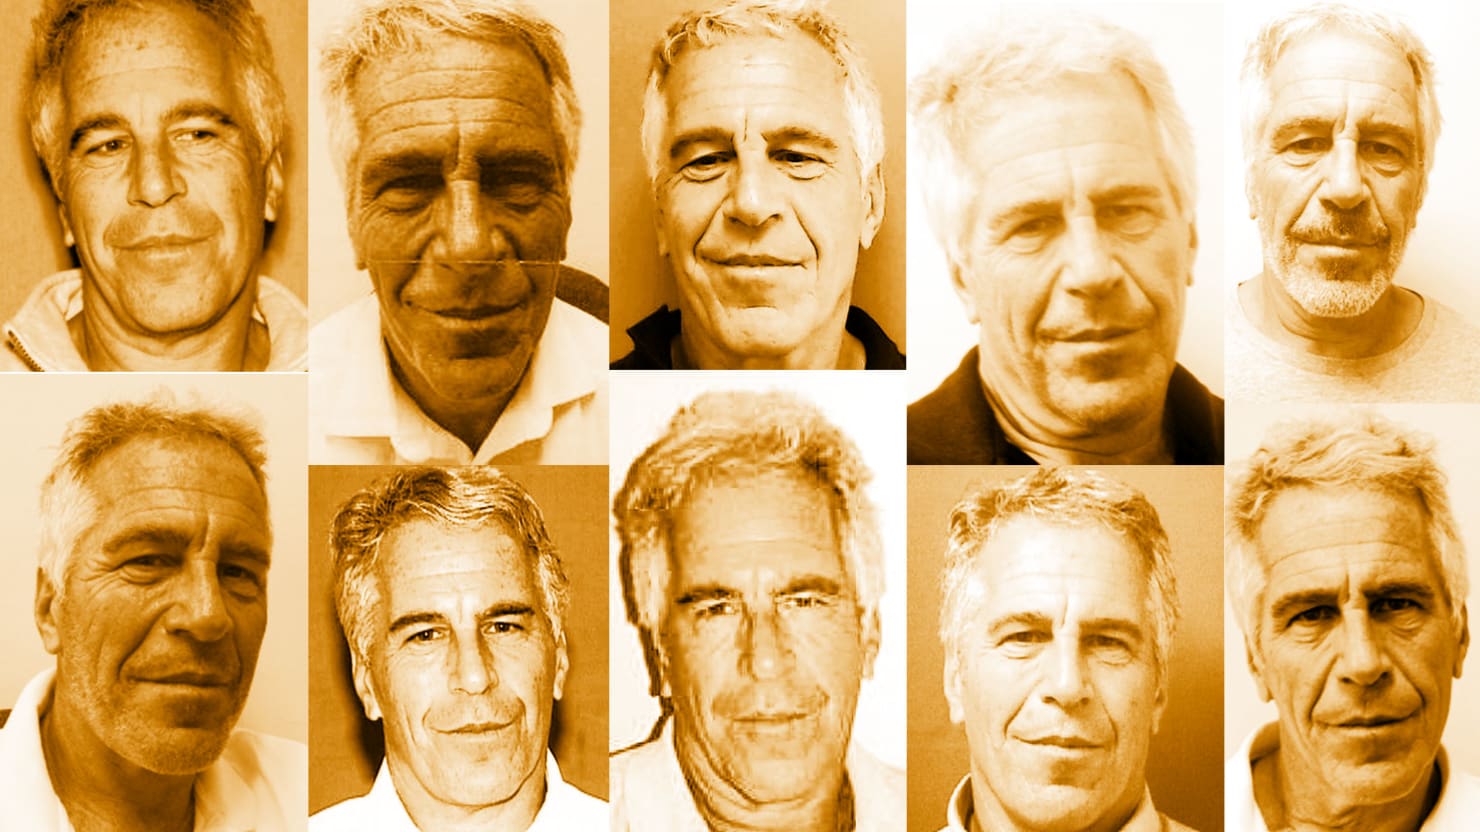 New trove of Jeffrey Epstein's files entries reveals pedophile's network of  power